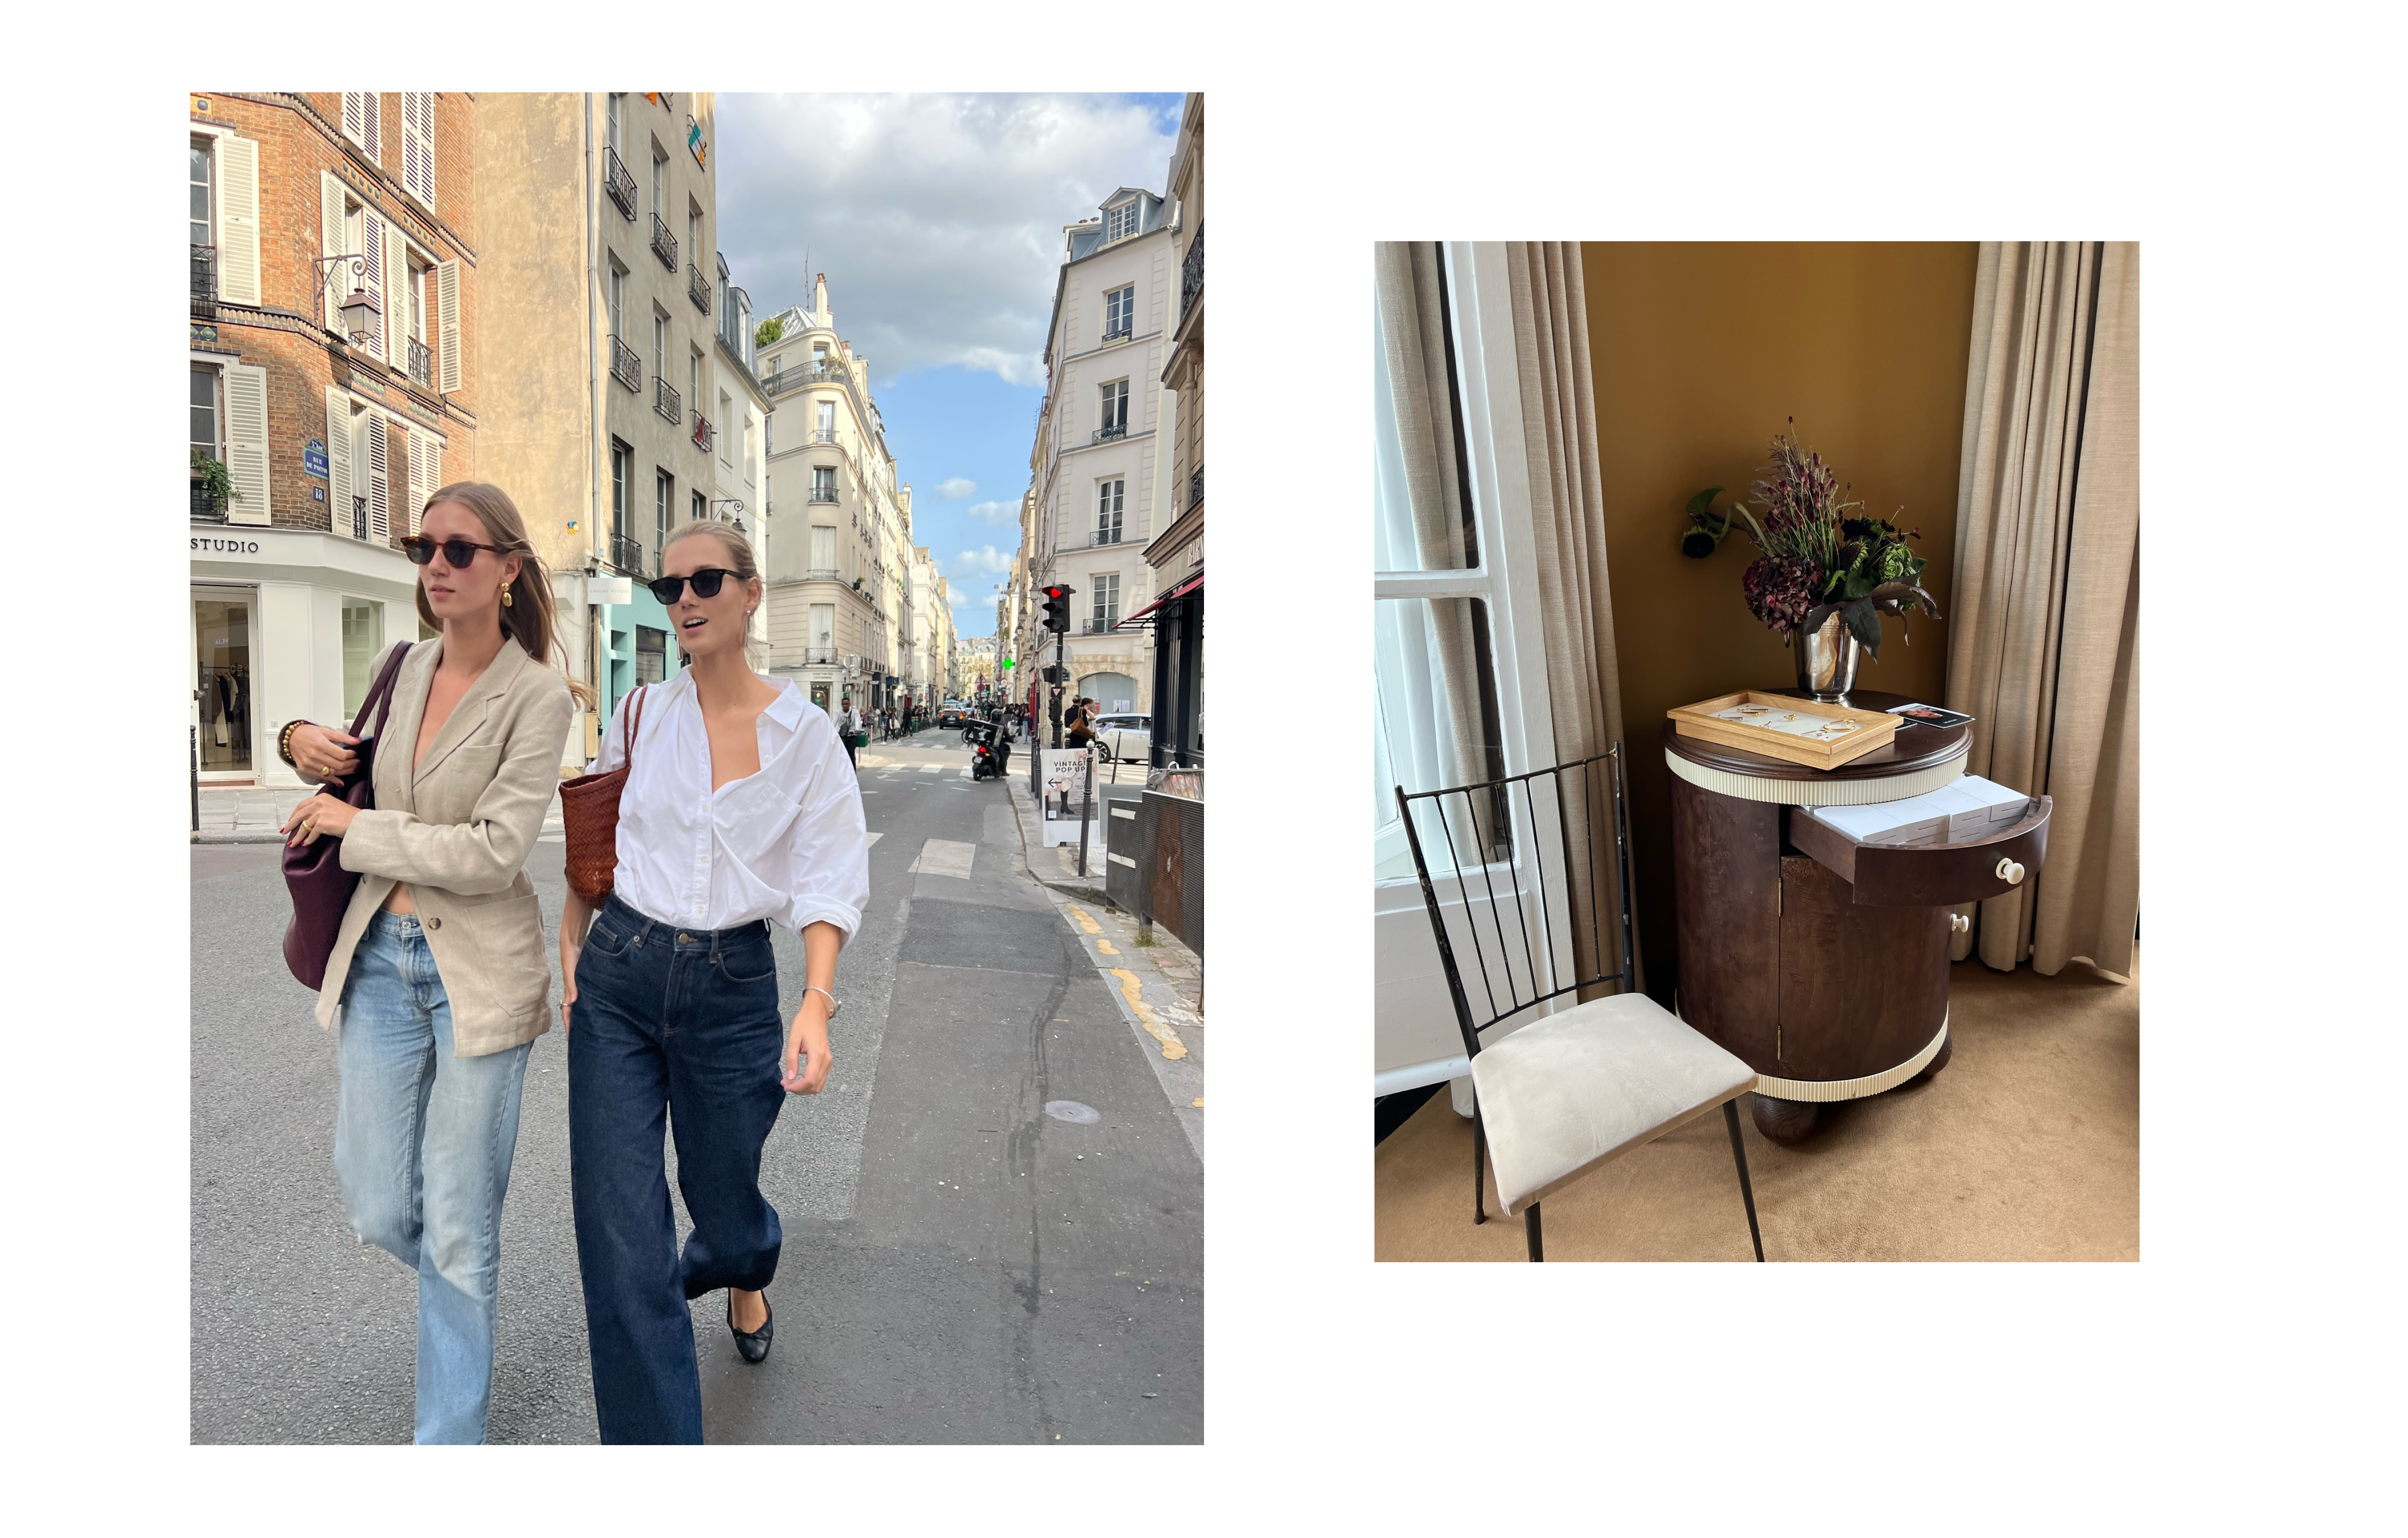 During Paris Fashion Week we stayed at the amazing Hôtel Rochechouart. We were completely in love with the interior and aesthetics 